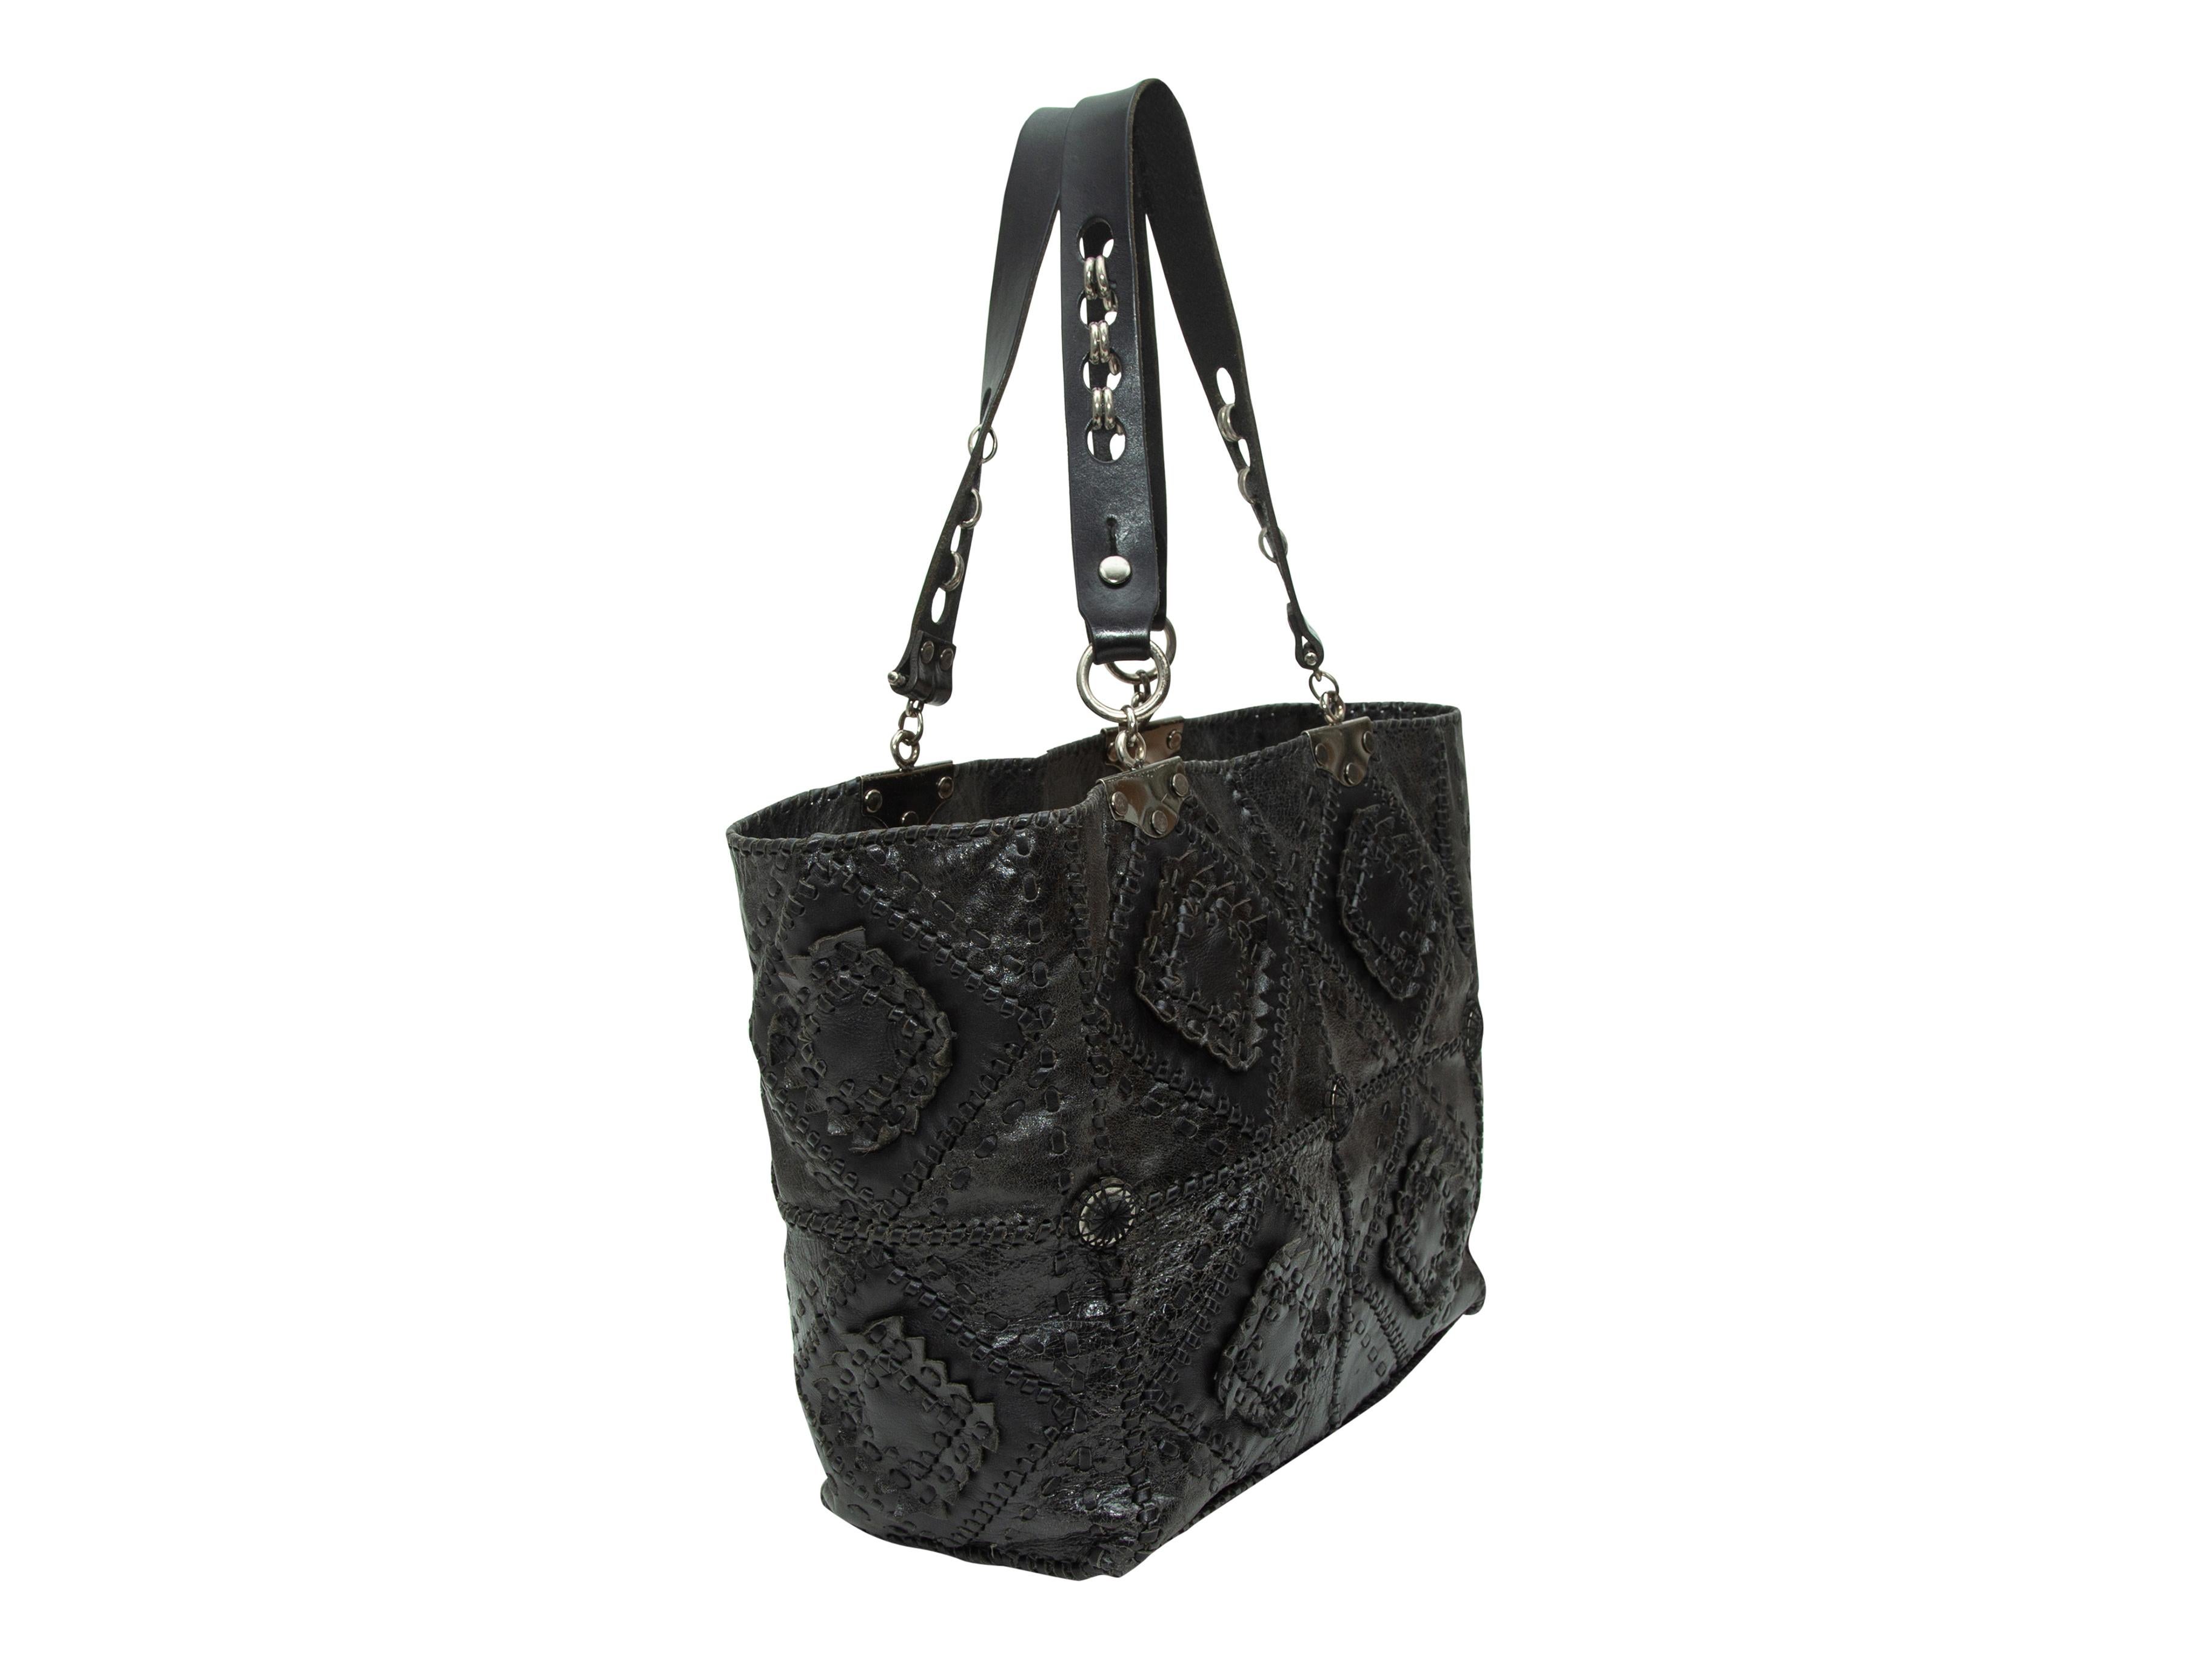 Product details: Black patchwork leather tote bag by Jamin Puech. Silver-tone hardware. Interior zip pocket. Dual handles. Woven detailing throughout. 17